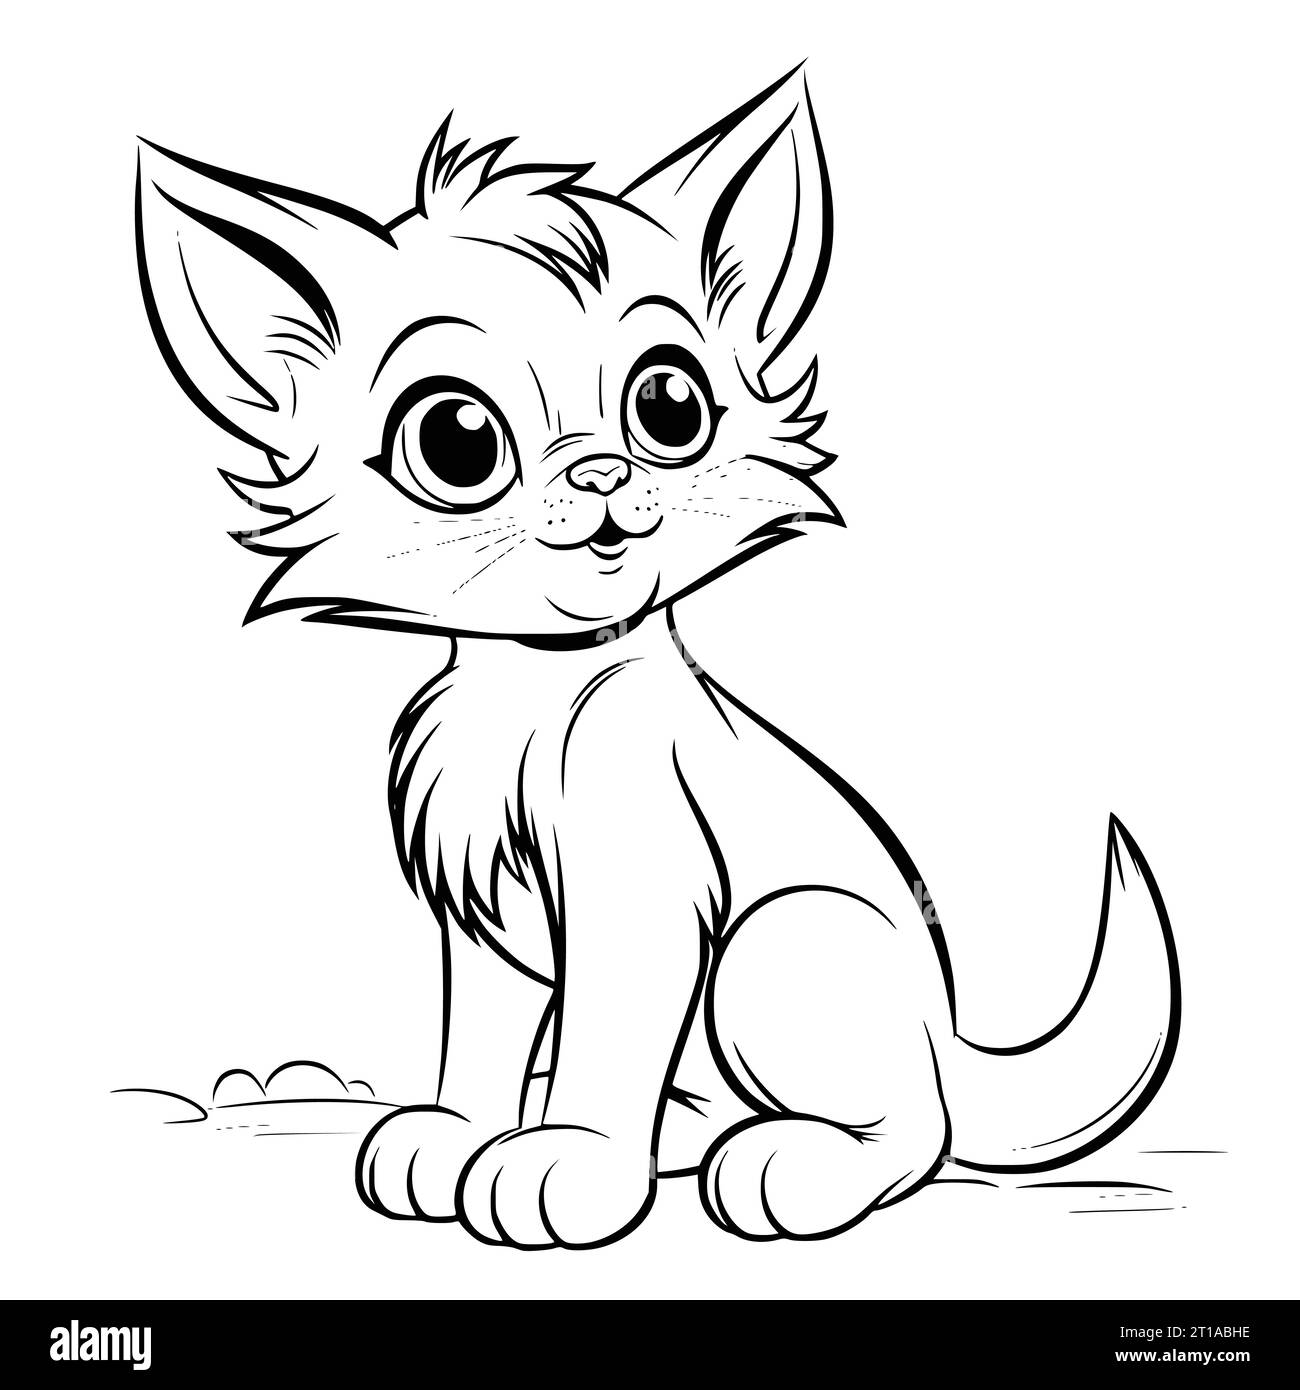 Cat Standing Coloring Page Drawing For Kids Stock Vector